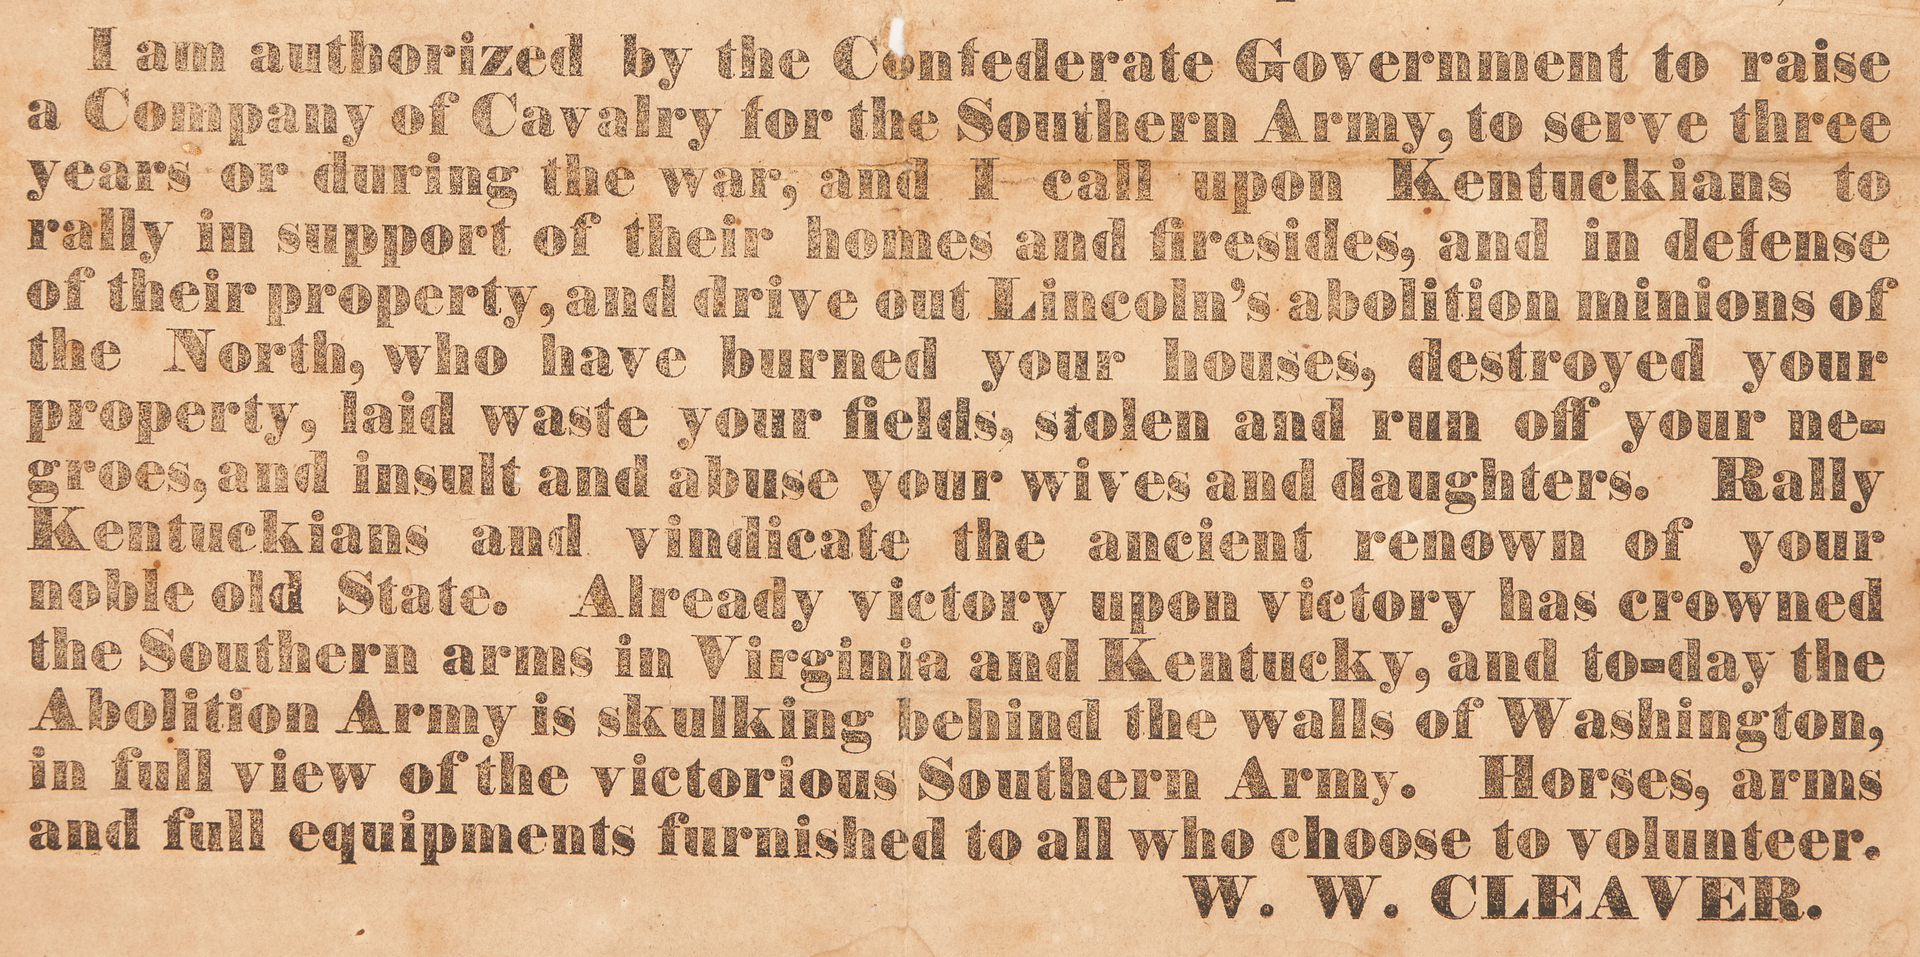 Lot 658: Kentucky Confederate Call to Arms Broadside, 1862